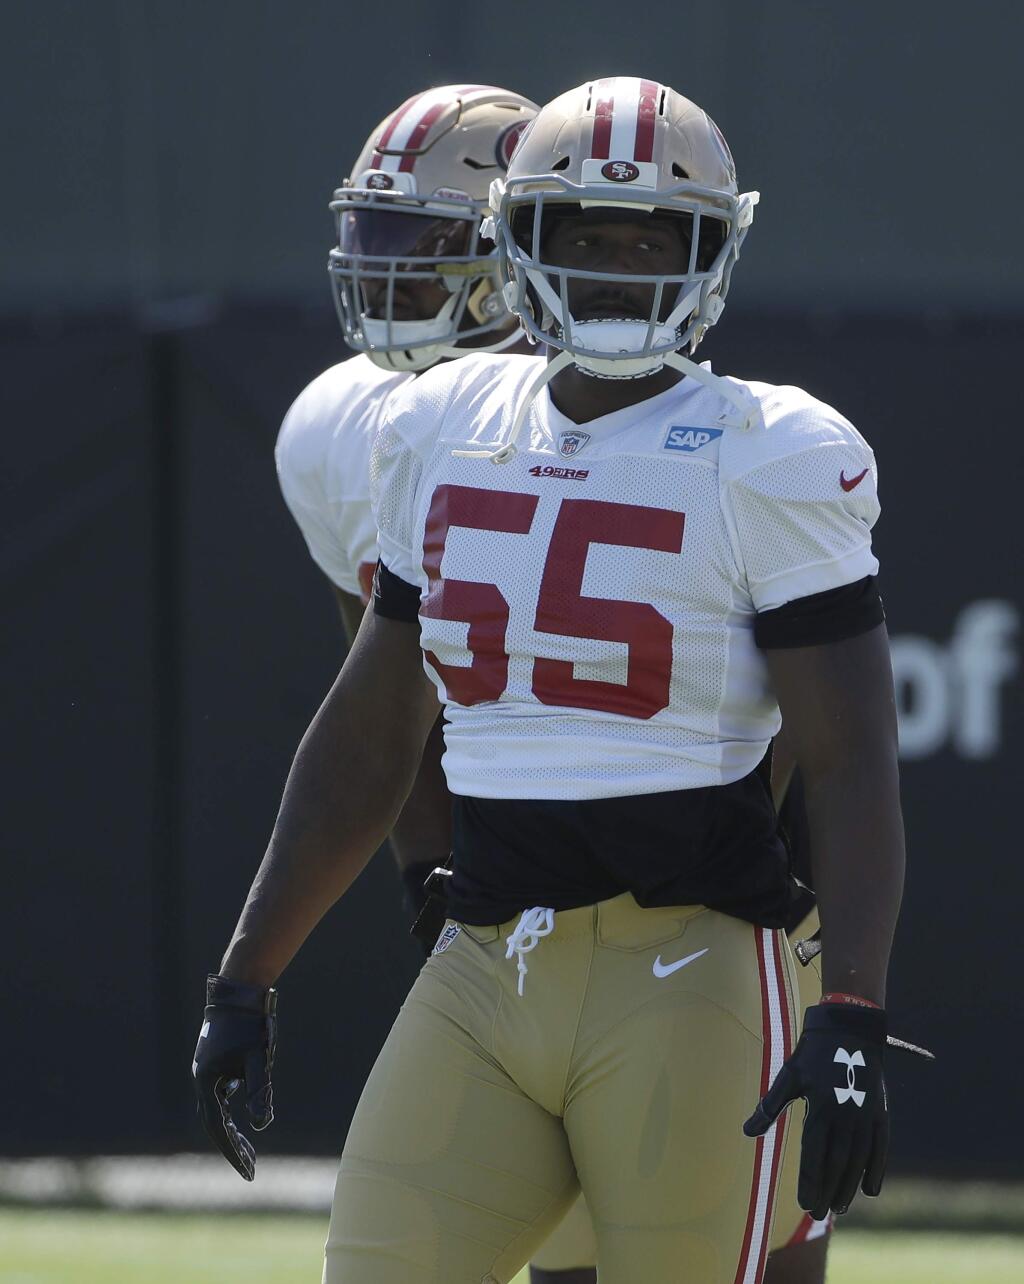 The San Francisco 49ers' Dee Ford at the team's training camp in Santa Clara, Monday, July 29, 2019. (AP Photo/Jeff Chiu)